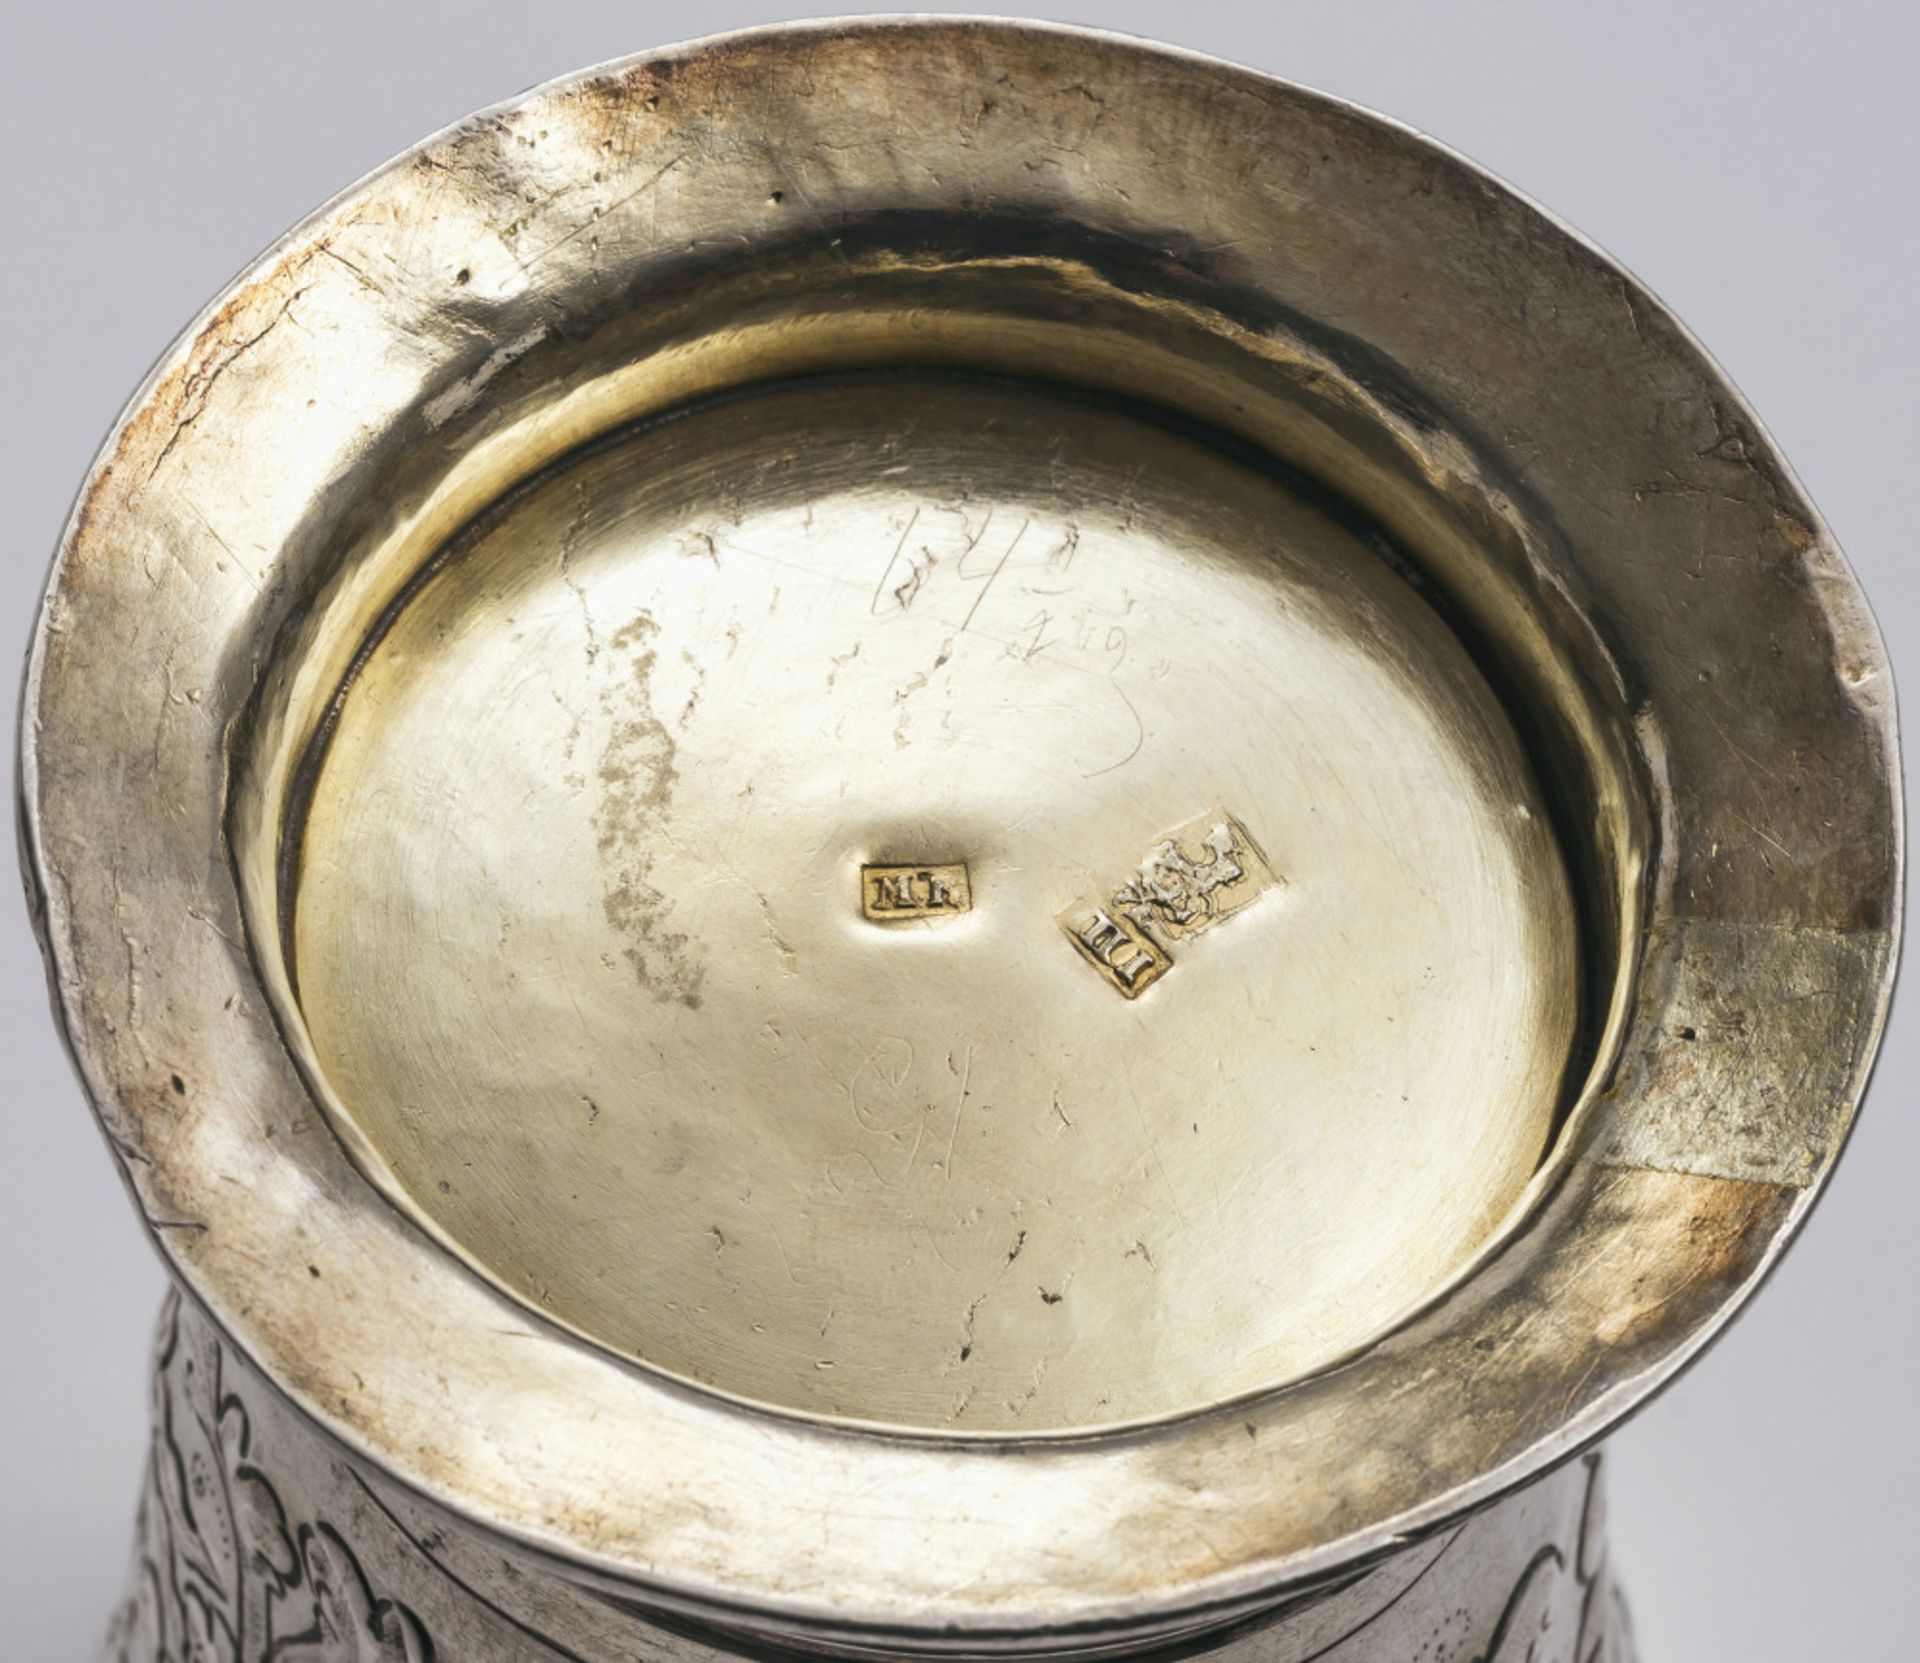 A beaker - Moscow, mid-18th century  - Image 2 of 2